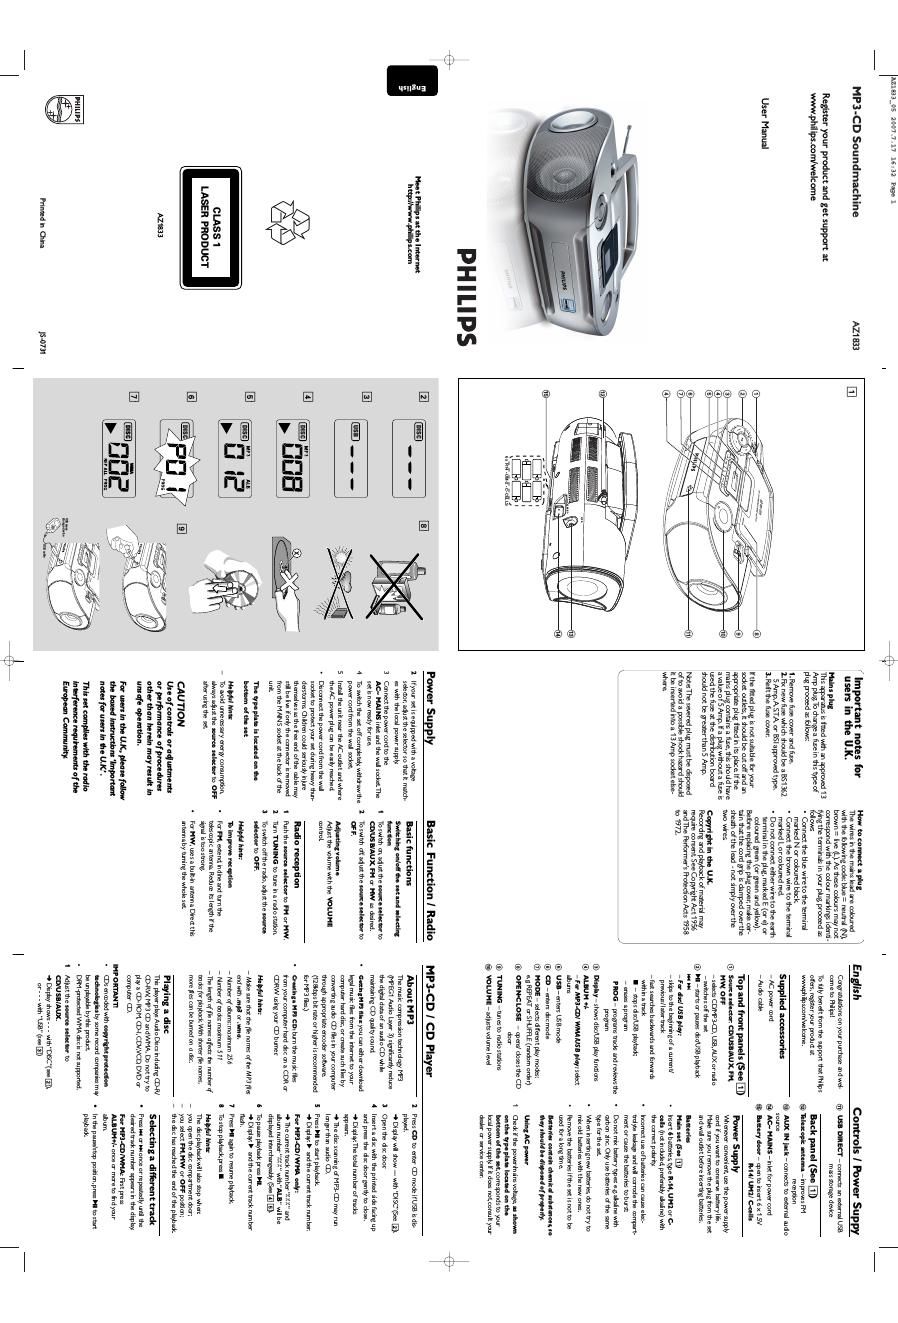 philips az 1833 owners manual